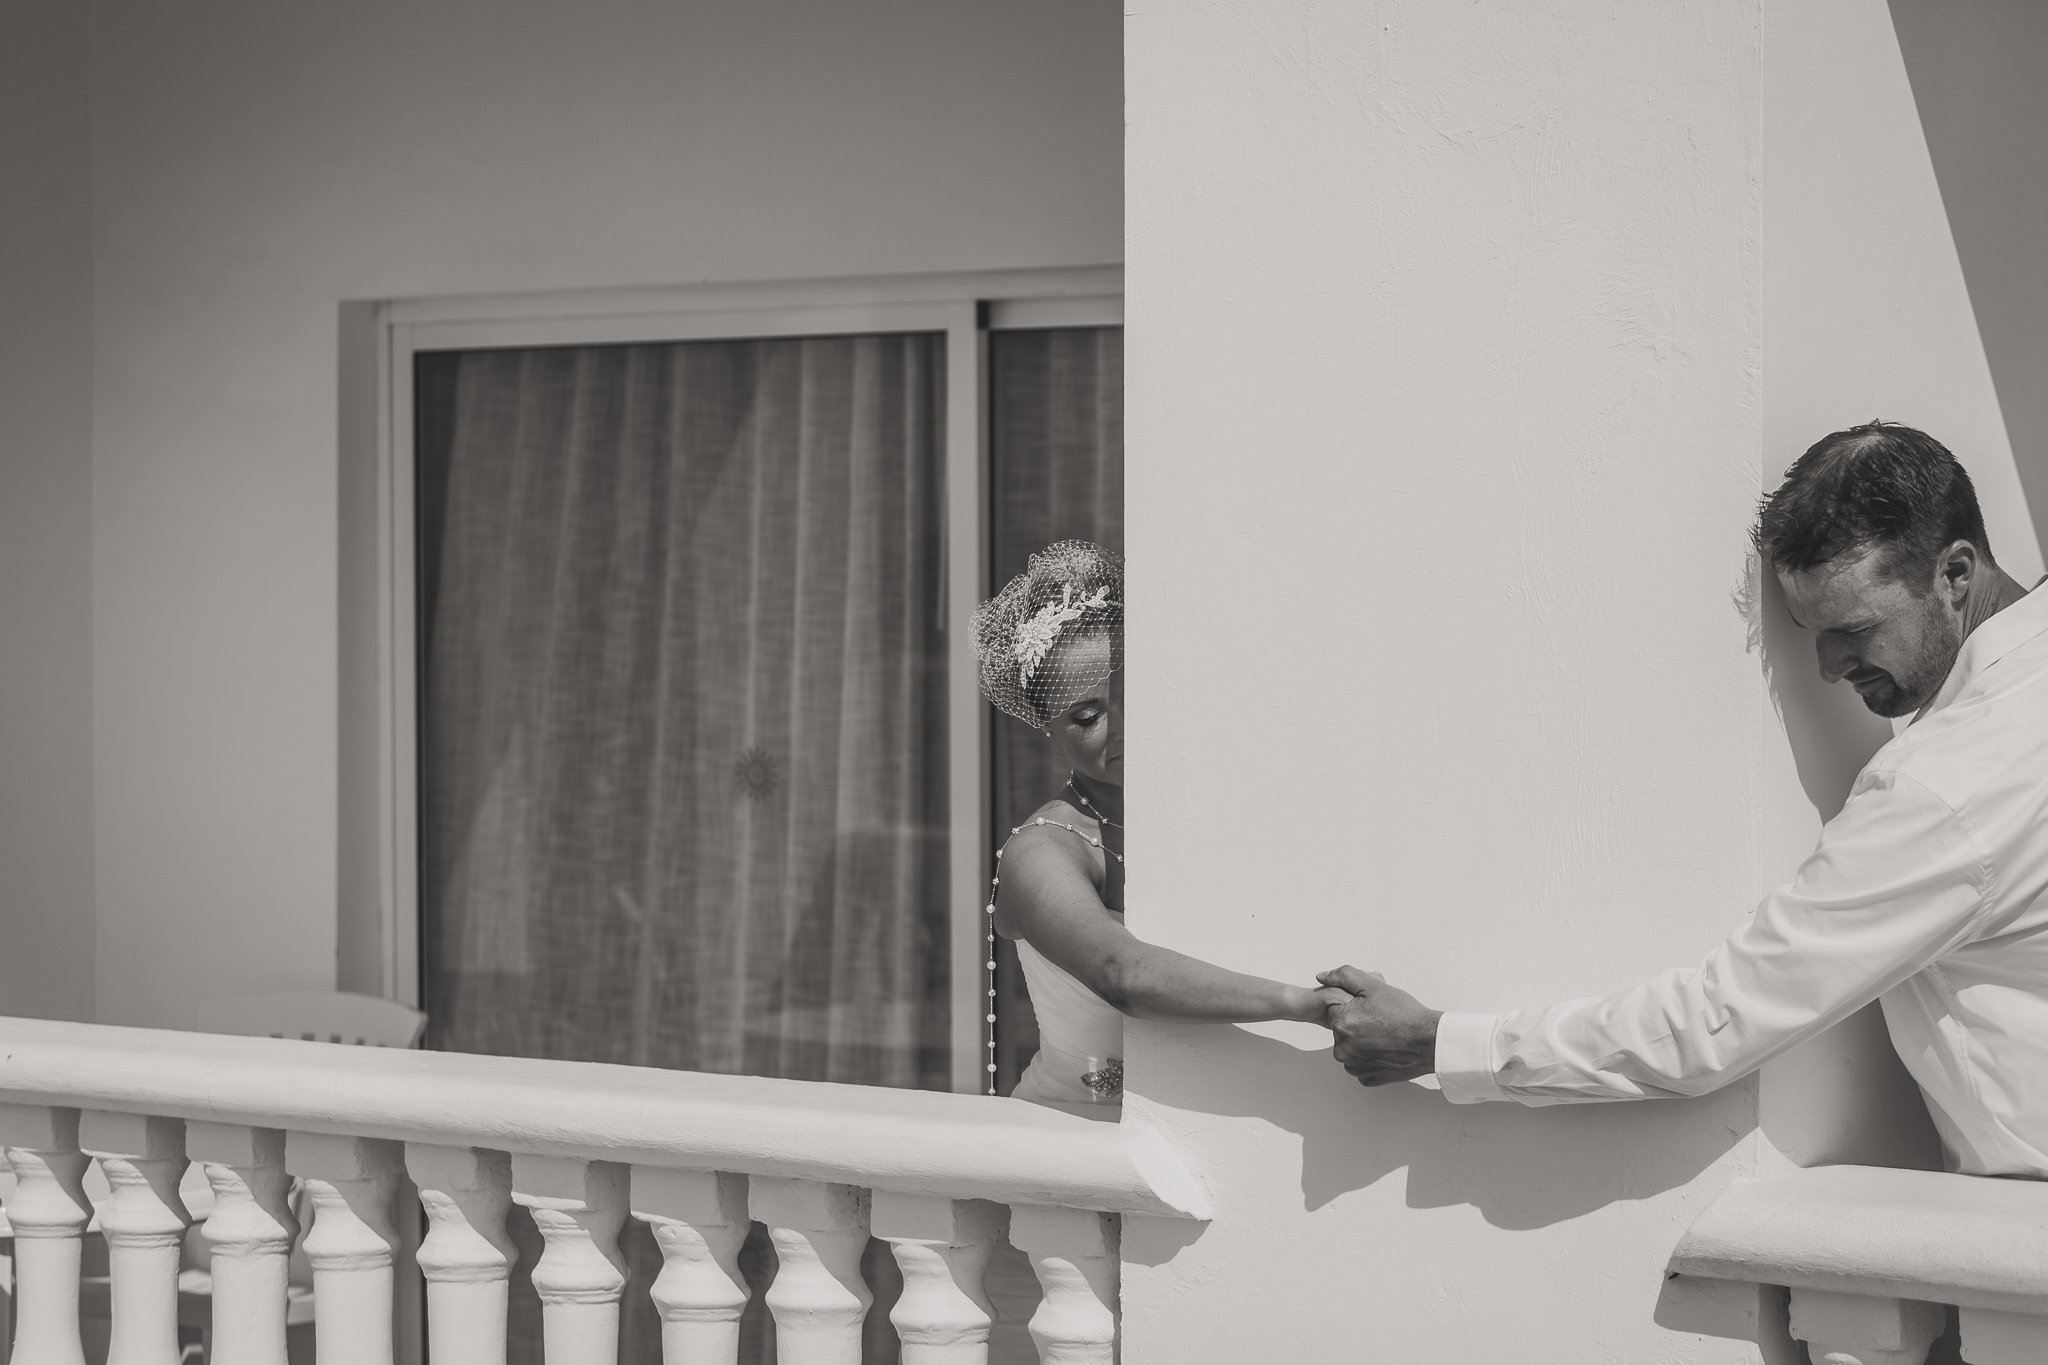 couple holding hands on a balcony